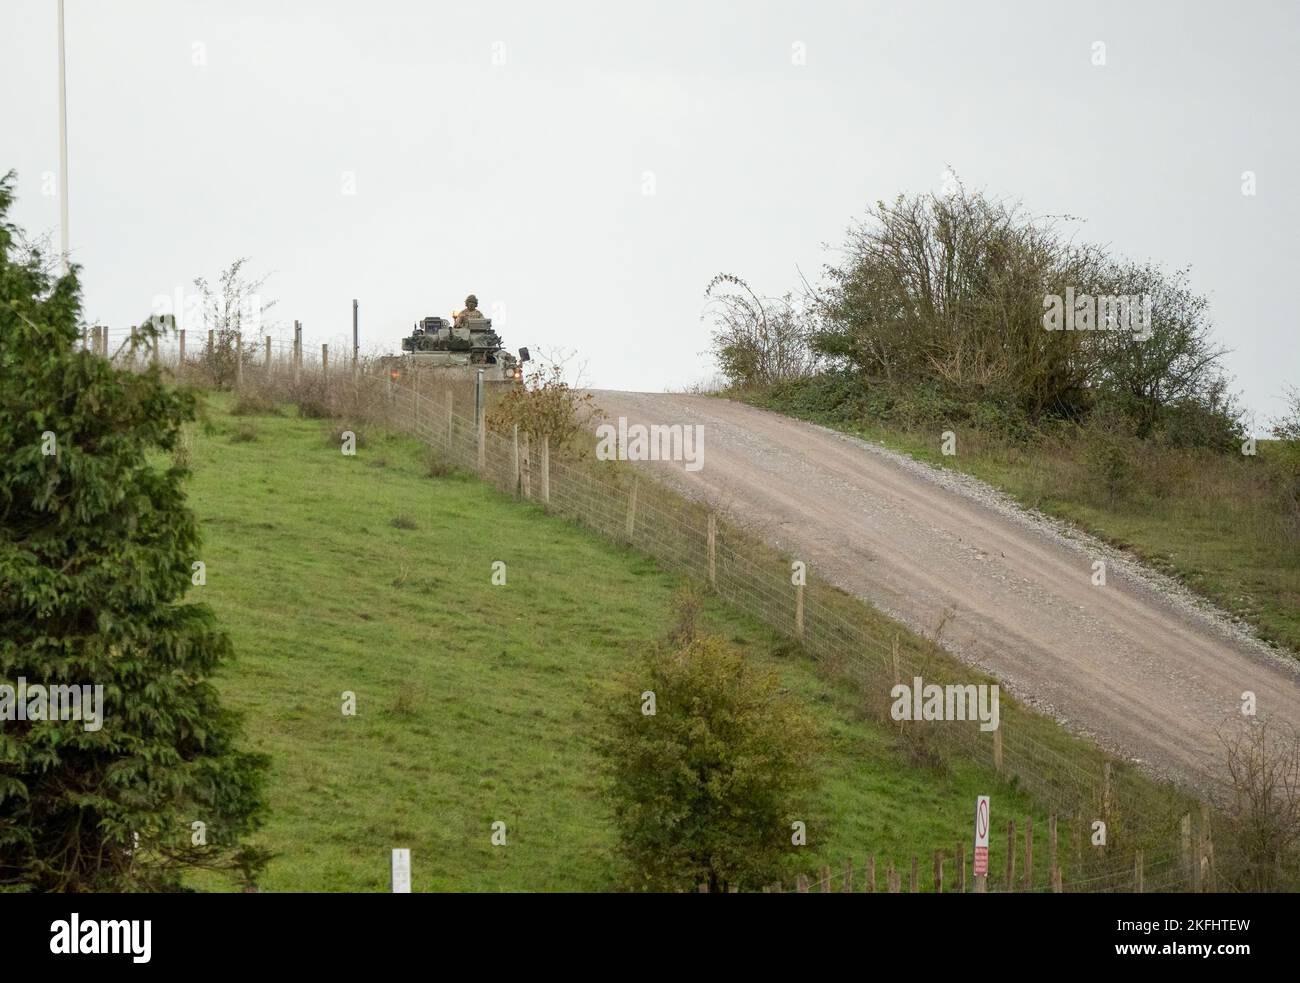 British army Warrior FV510 Tank in action Stock Photo